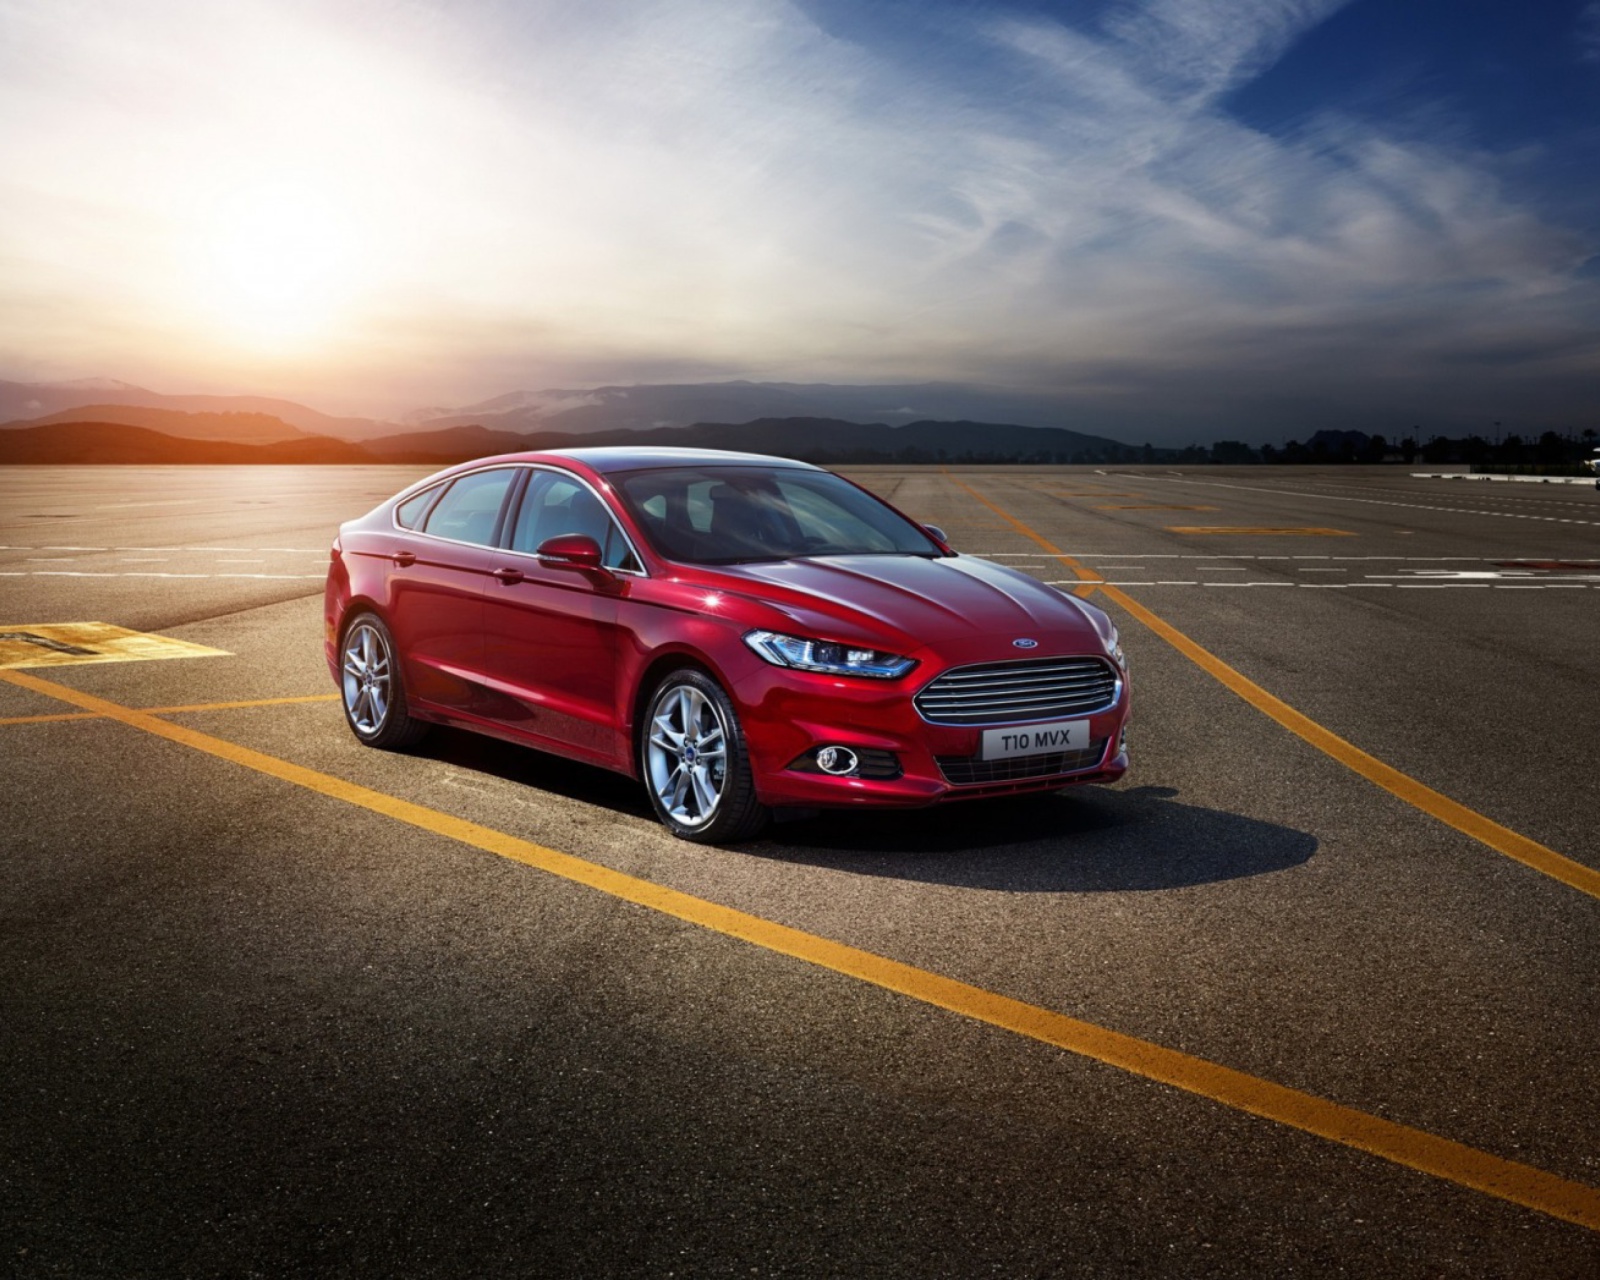 Ford Mondeo 2015 wallpaper 1600x1280